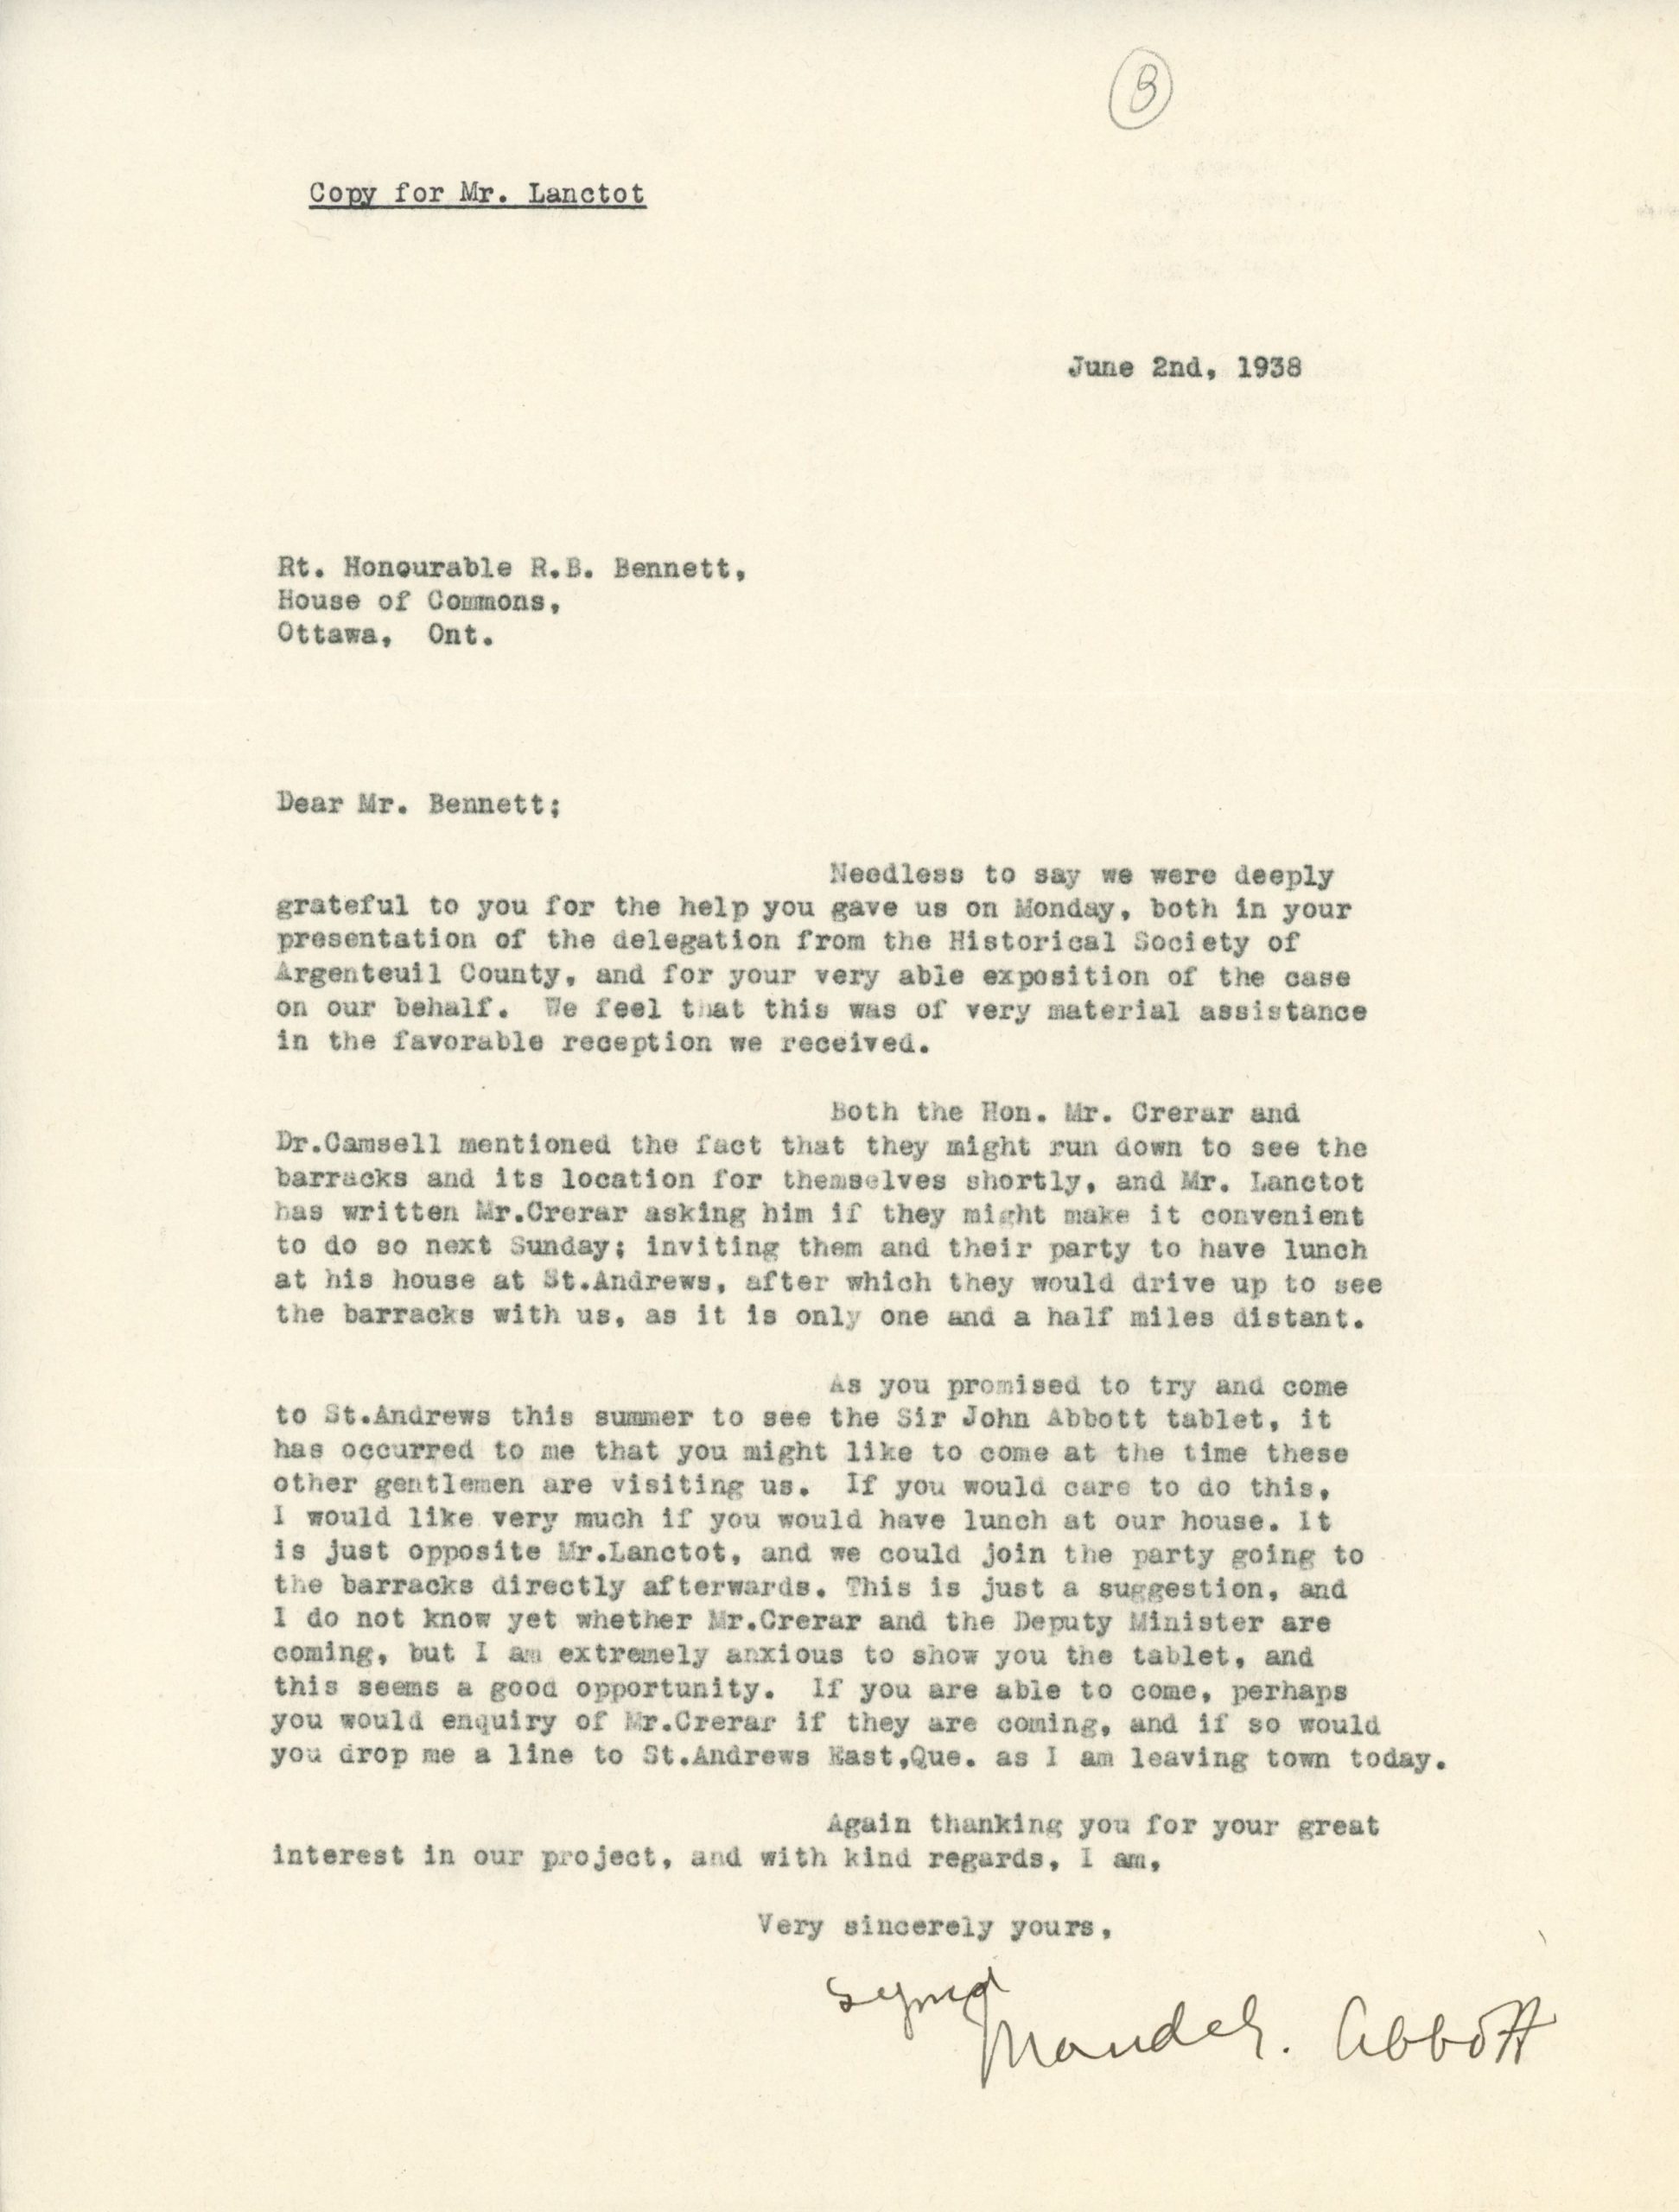 Copy of a typed letter from Maude Abbott to R. B. Bennett dated June 2, 1938. She thanks him for his help with the Historical Society of Argenteuil County and The Barracks and invites him to visit St-Andrews.